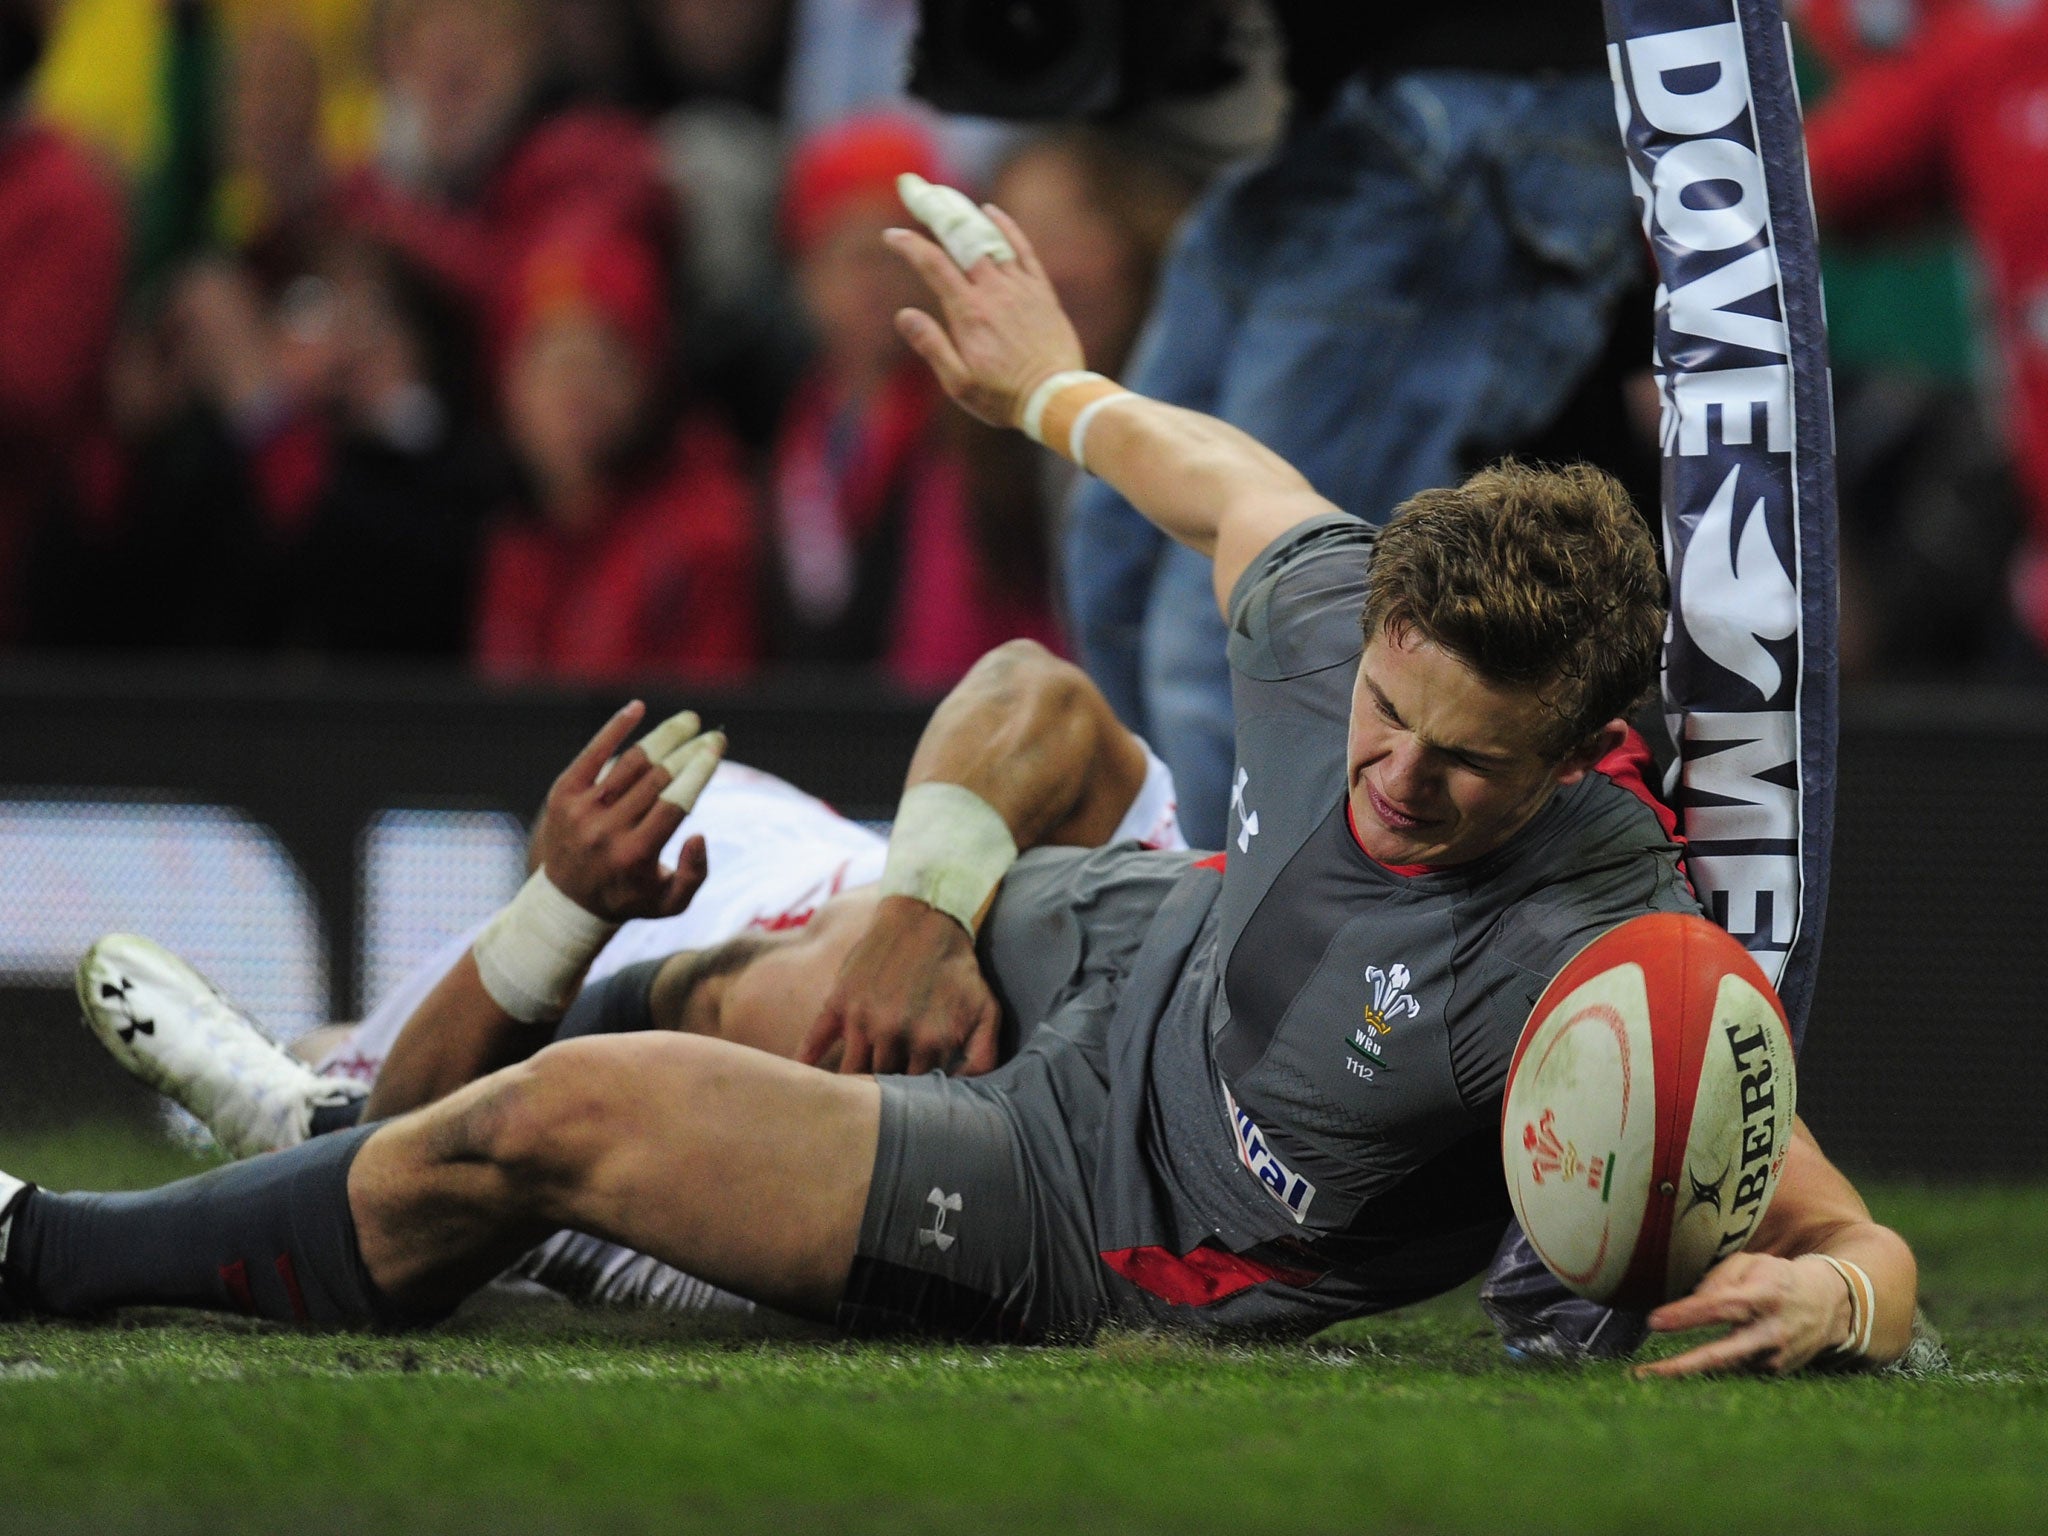 Wales wing Hallam Amos just misses out on a debut try